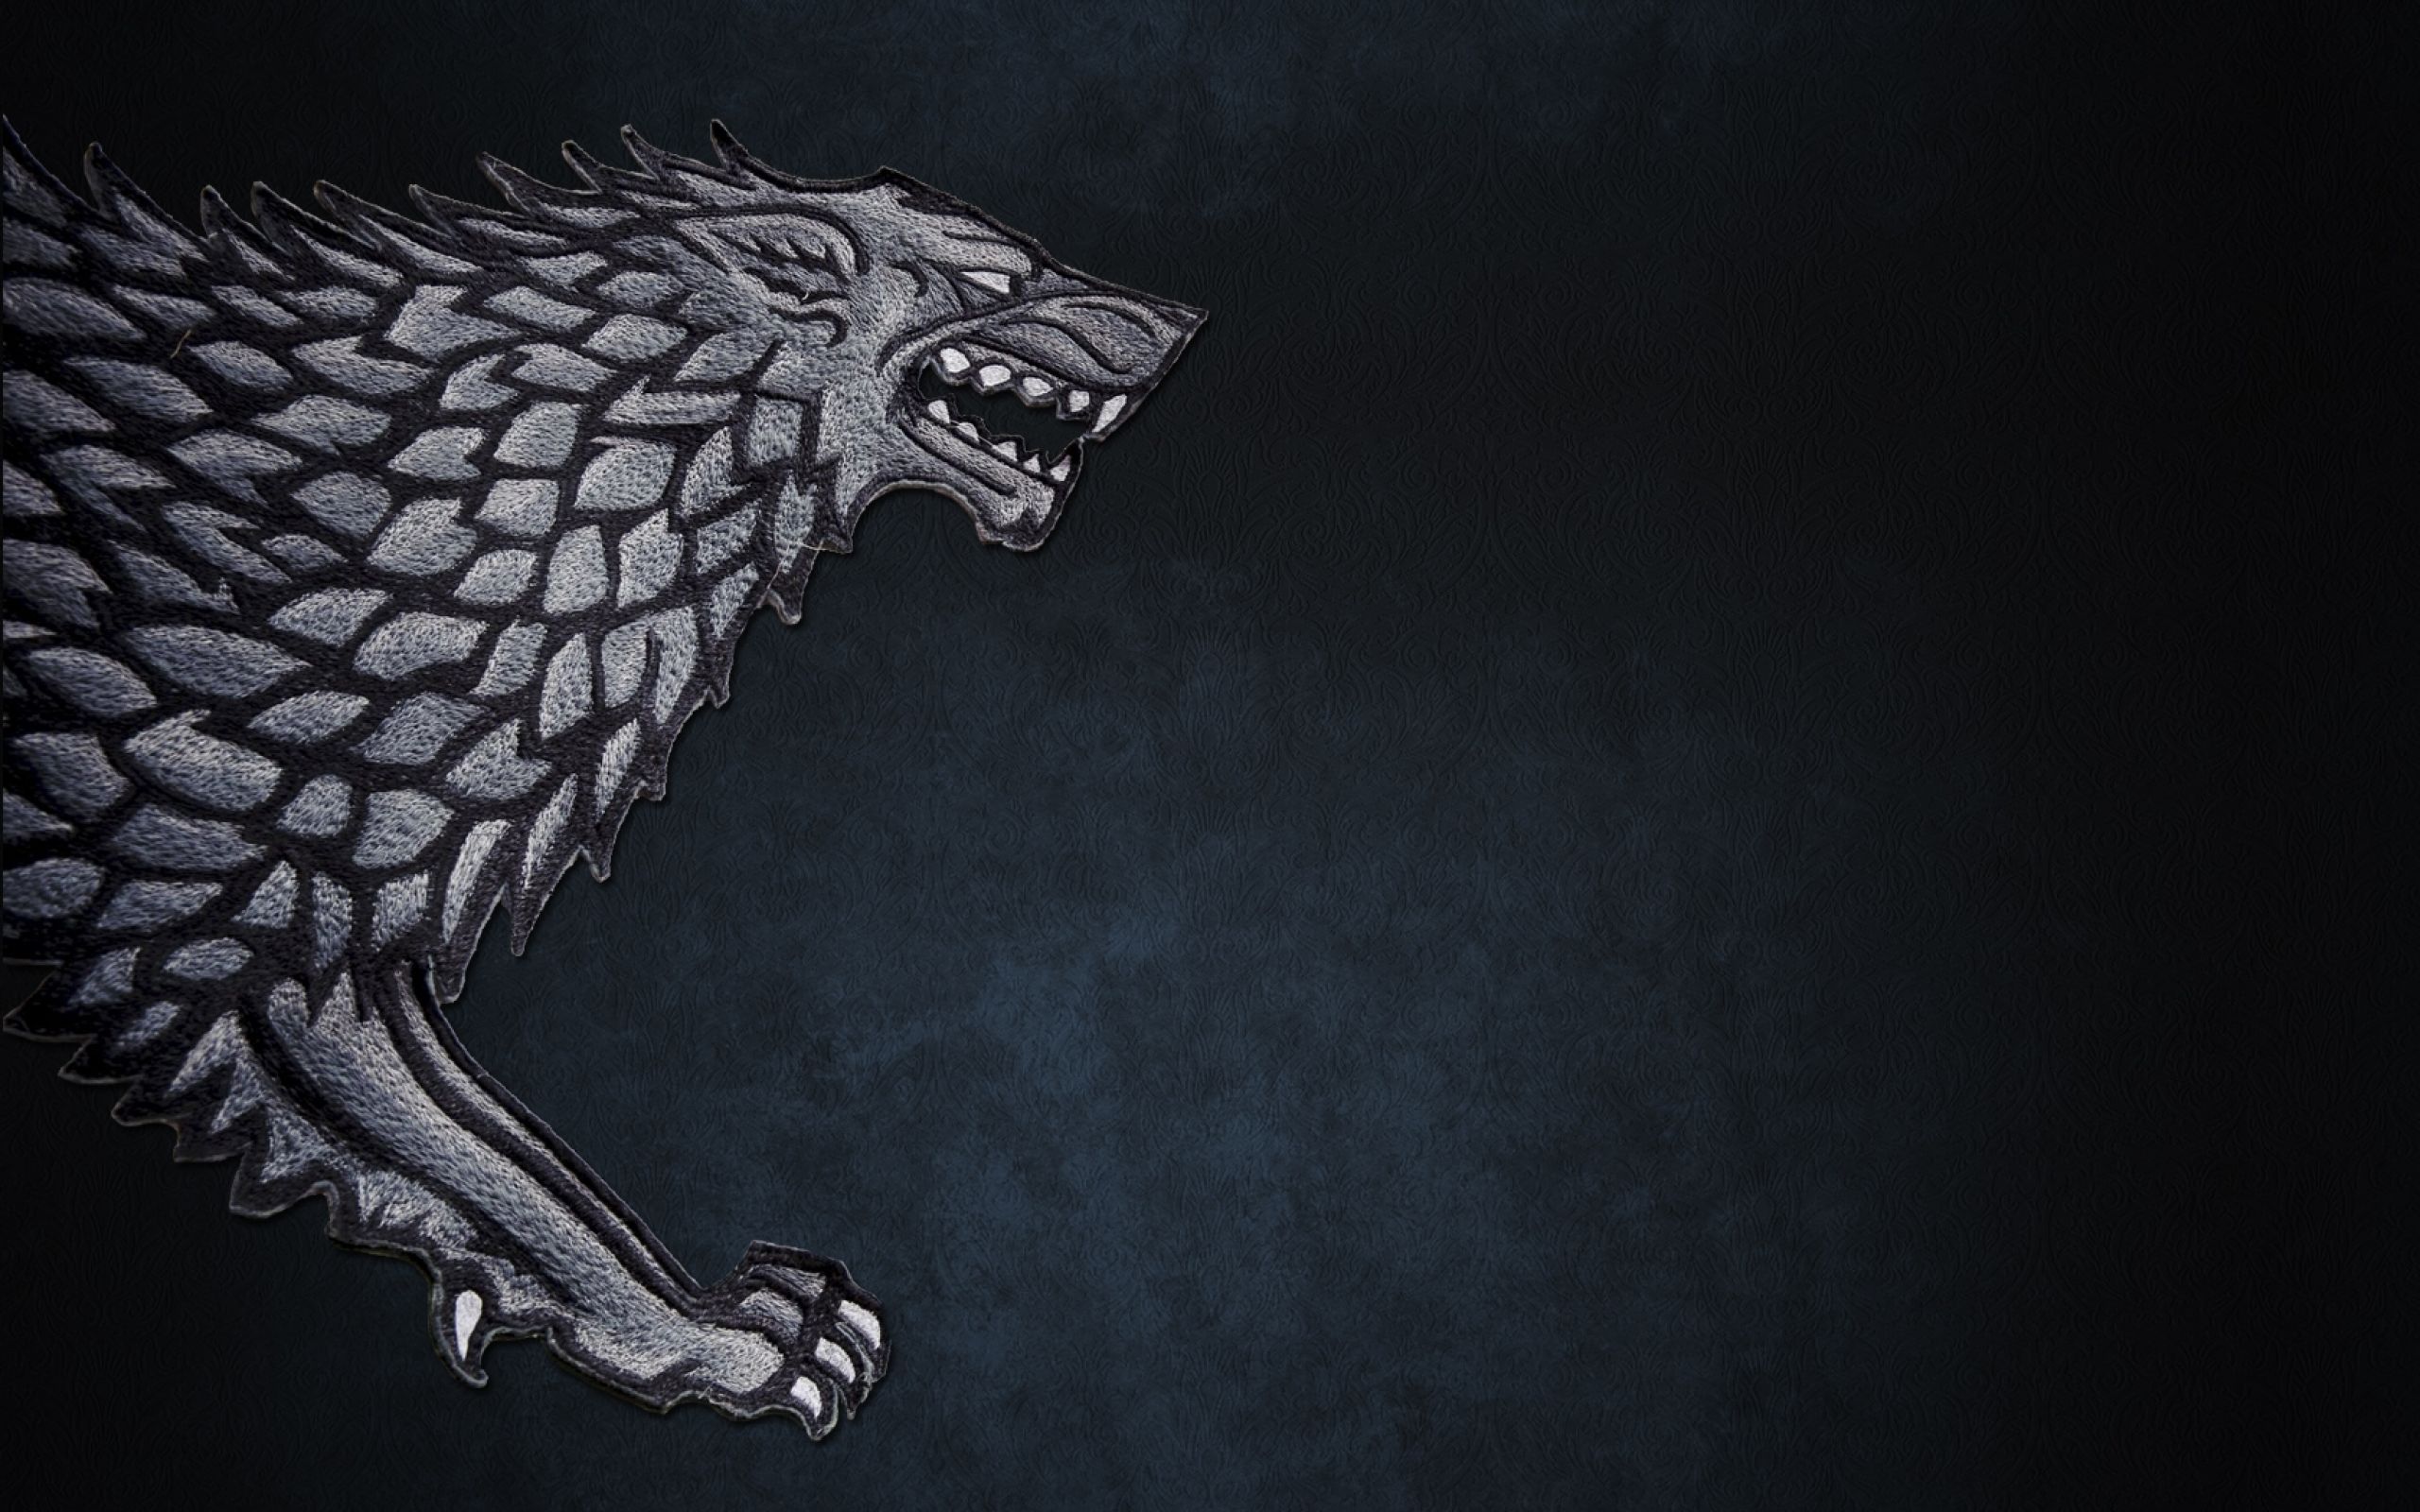 Wolves game of thrones a song of ice and fire stark direwolf house